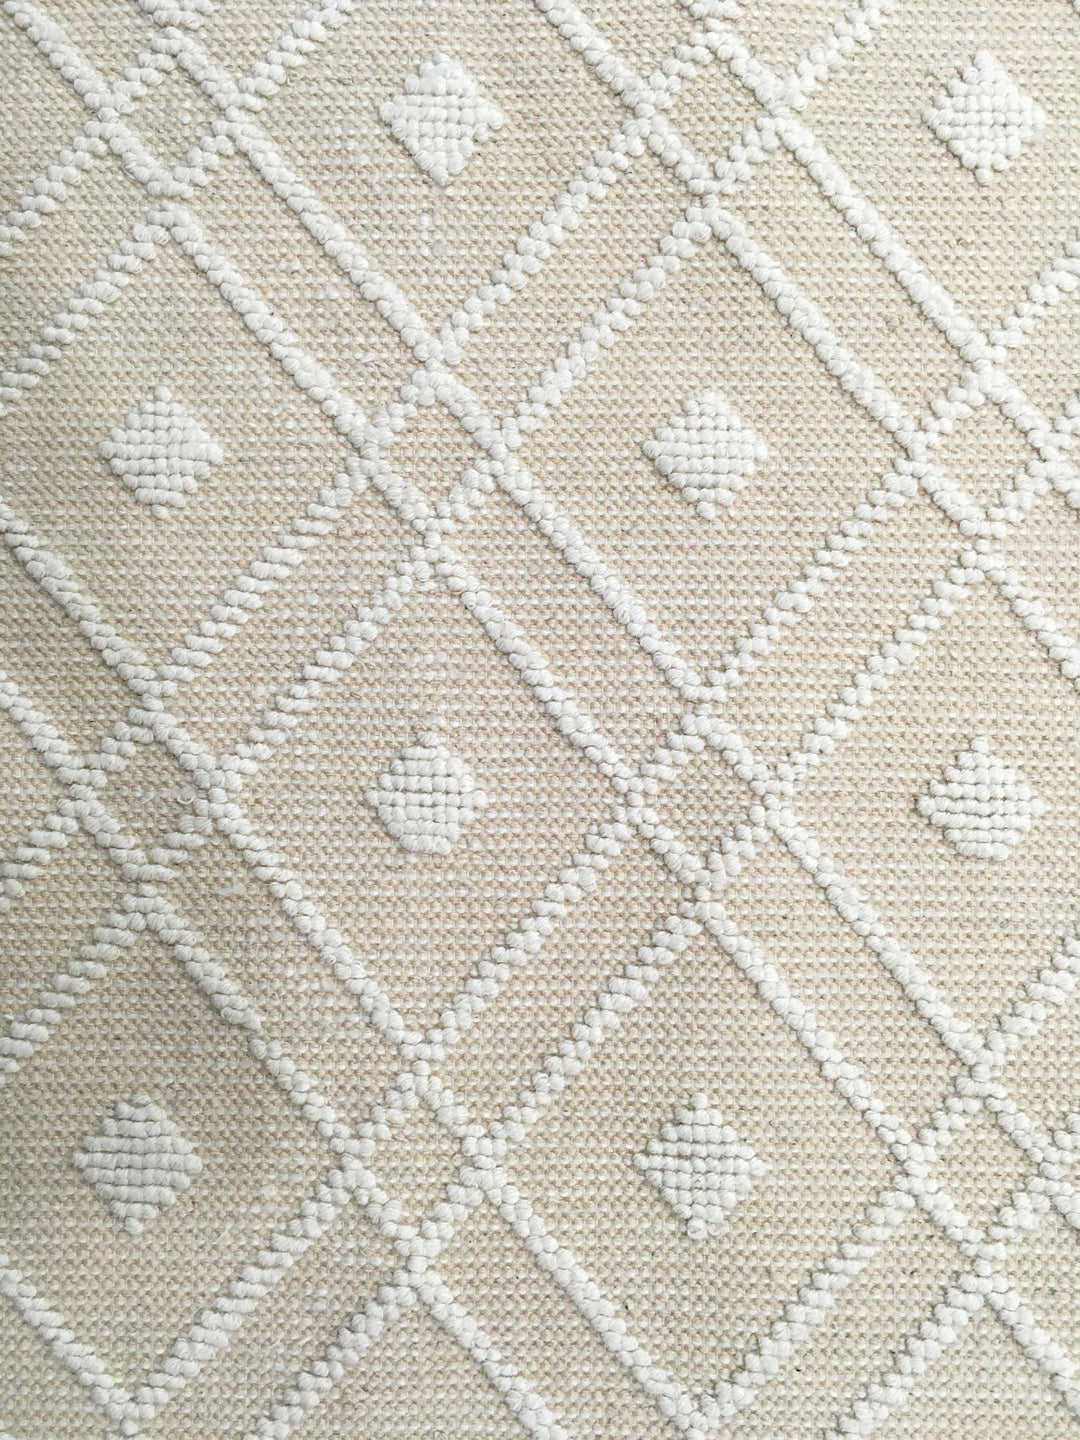 Close-up of the intricate handwoven texture on the Wool Handwoven Rug Argyle Diamond